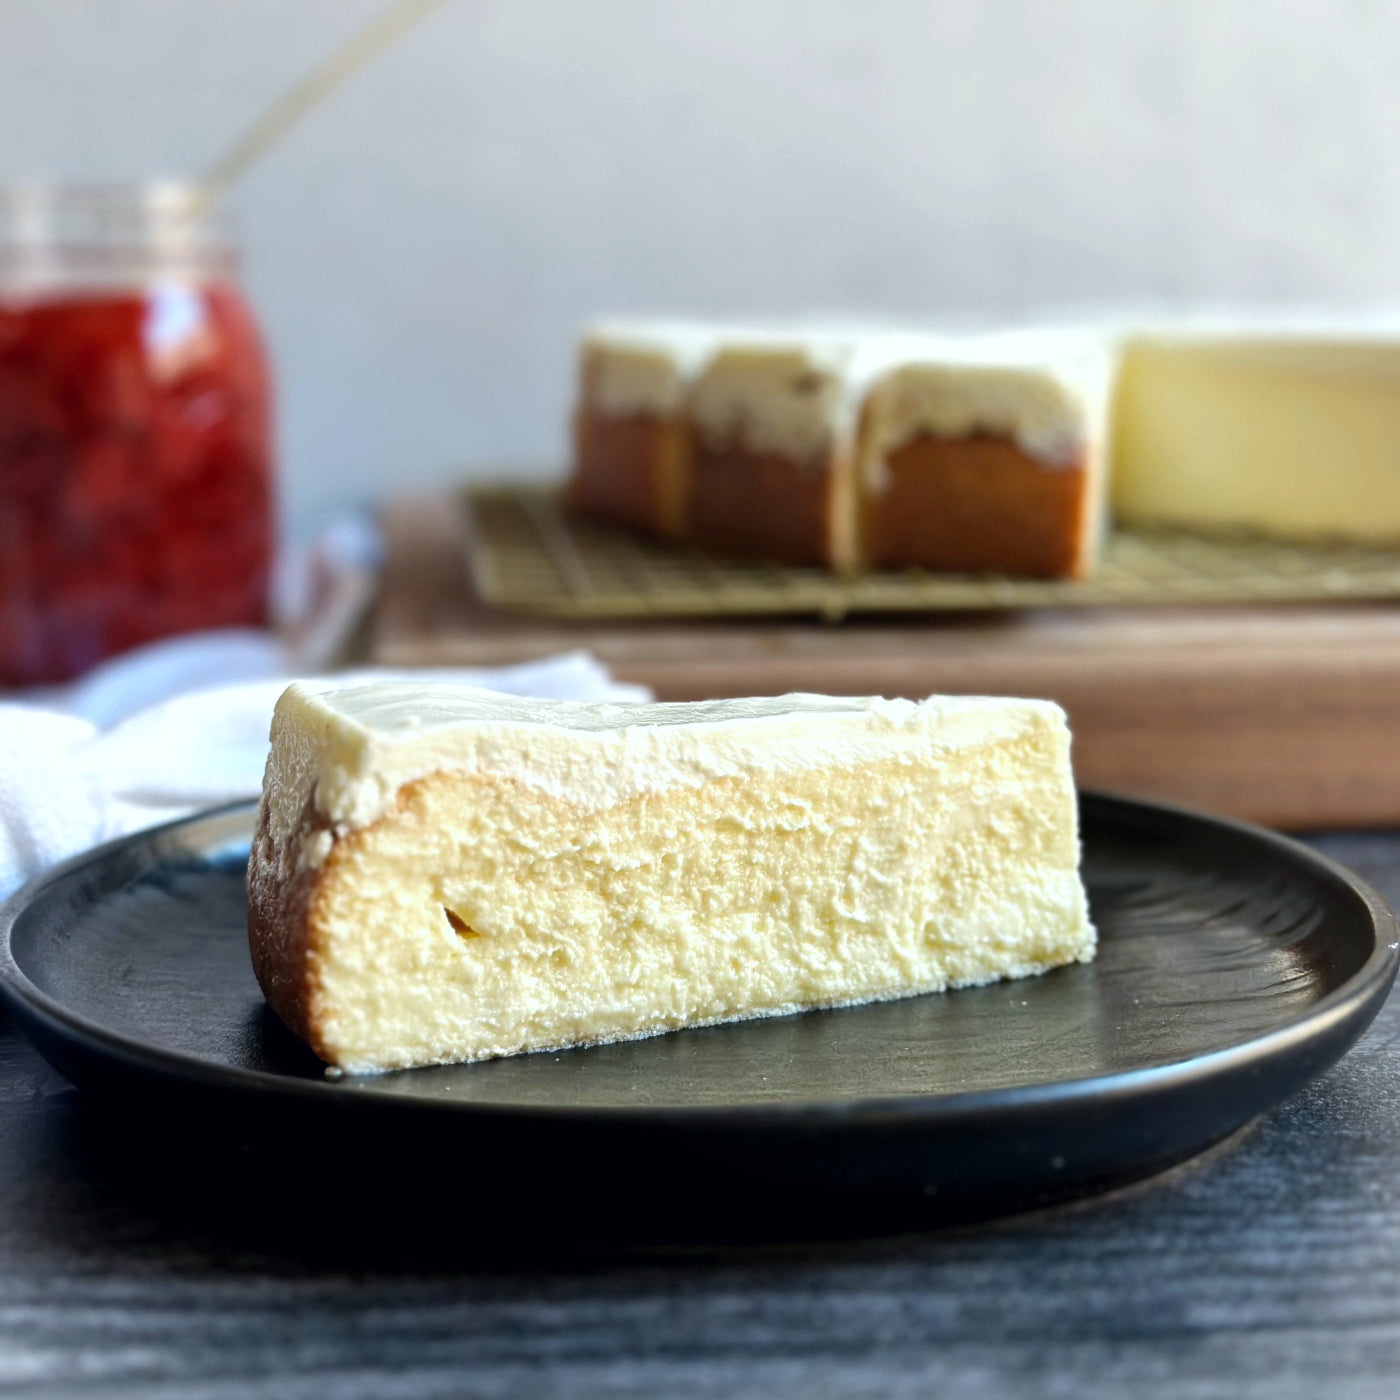 Velvety slice of Laura's Classic Cheesecake with a smooth layer of sweet cream cheese icing on top